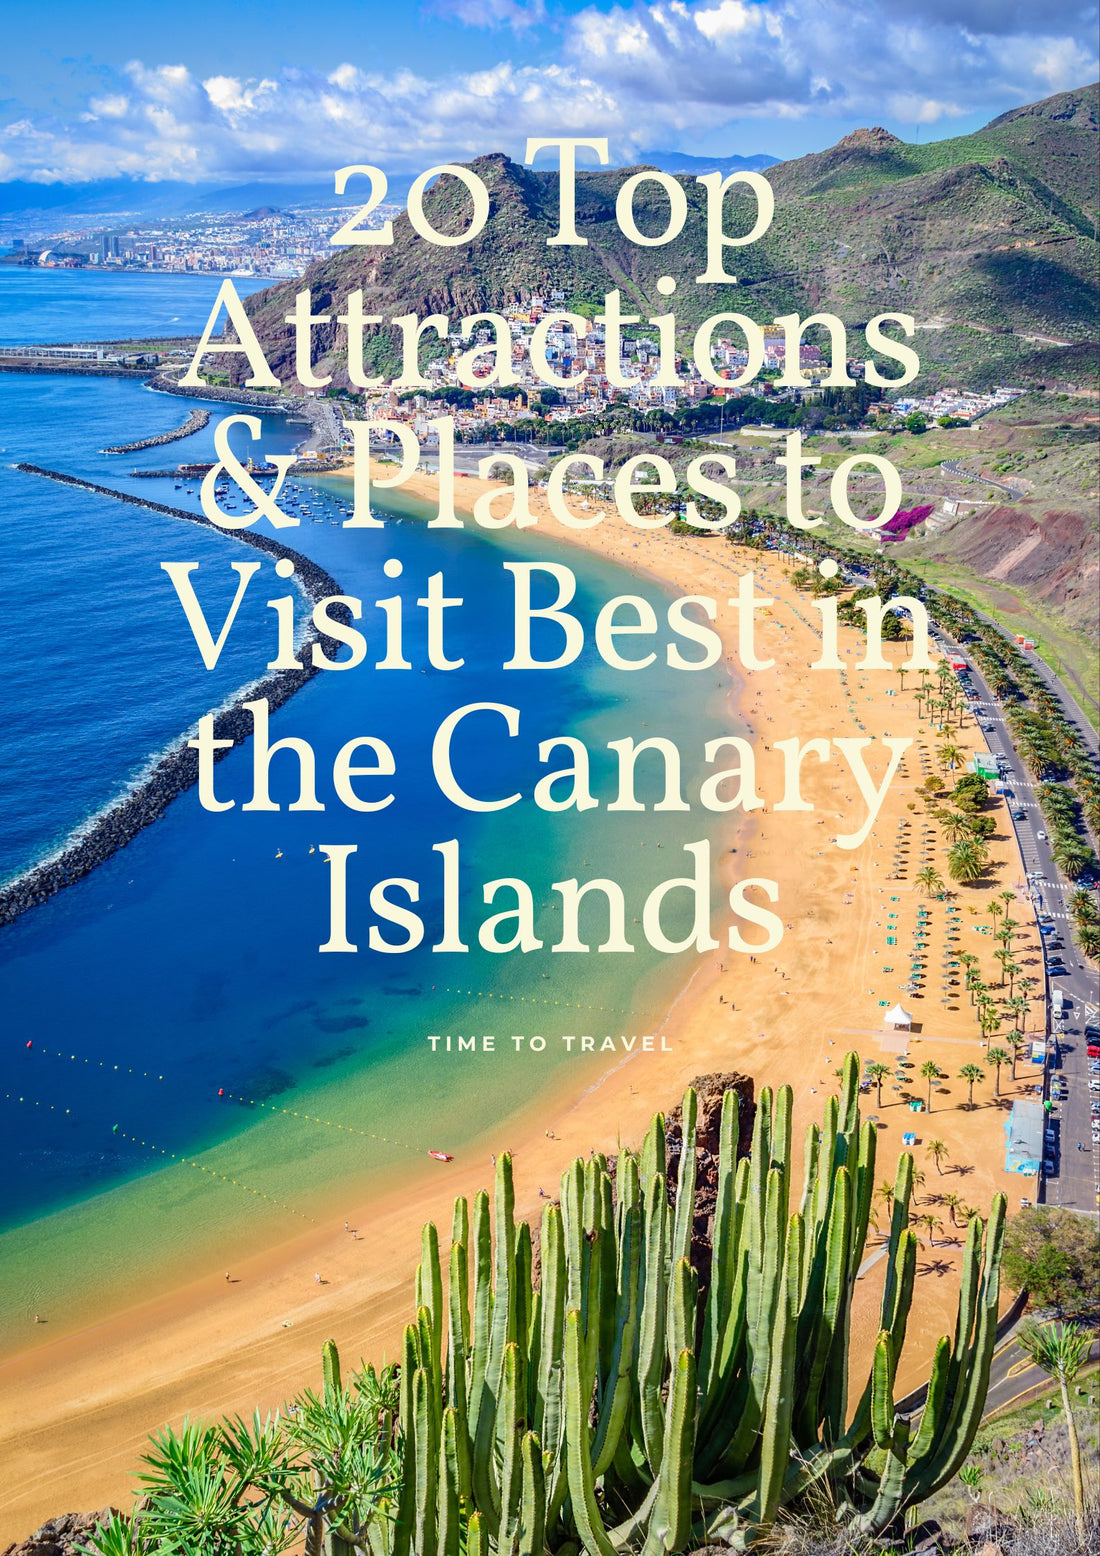 20 Top Attraction Places to Visit in the Canary Islands